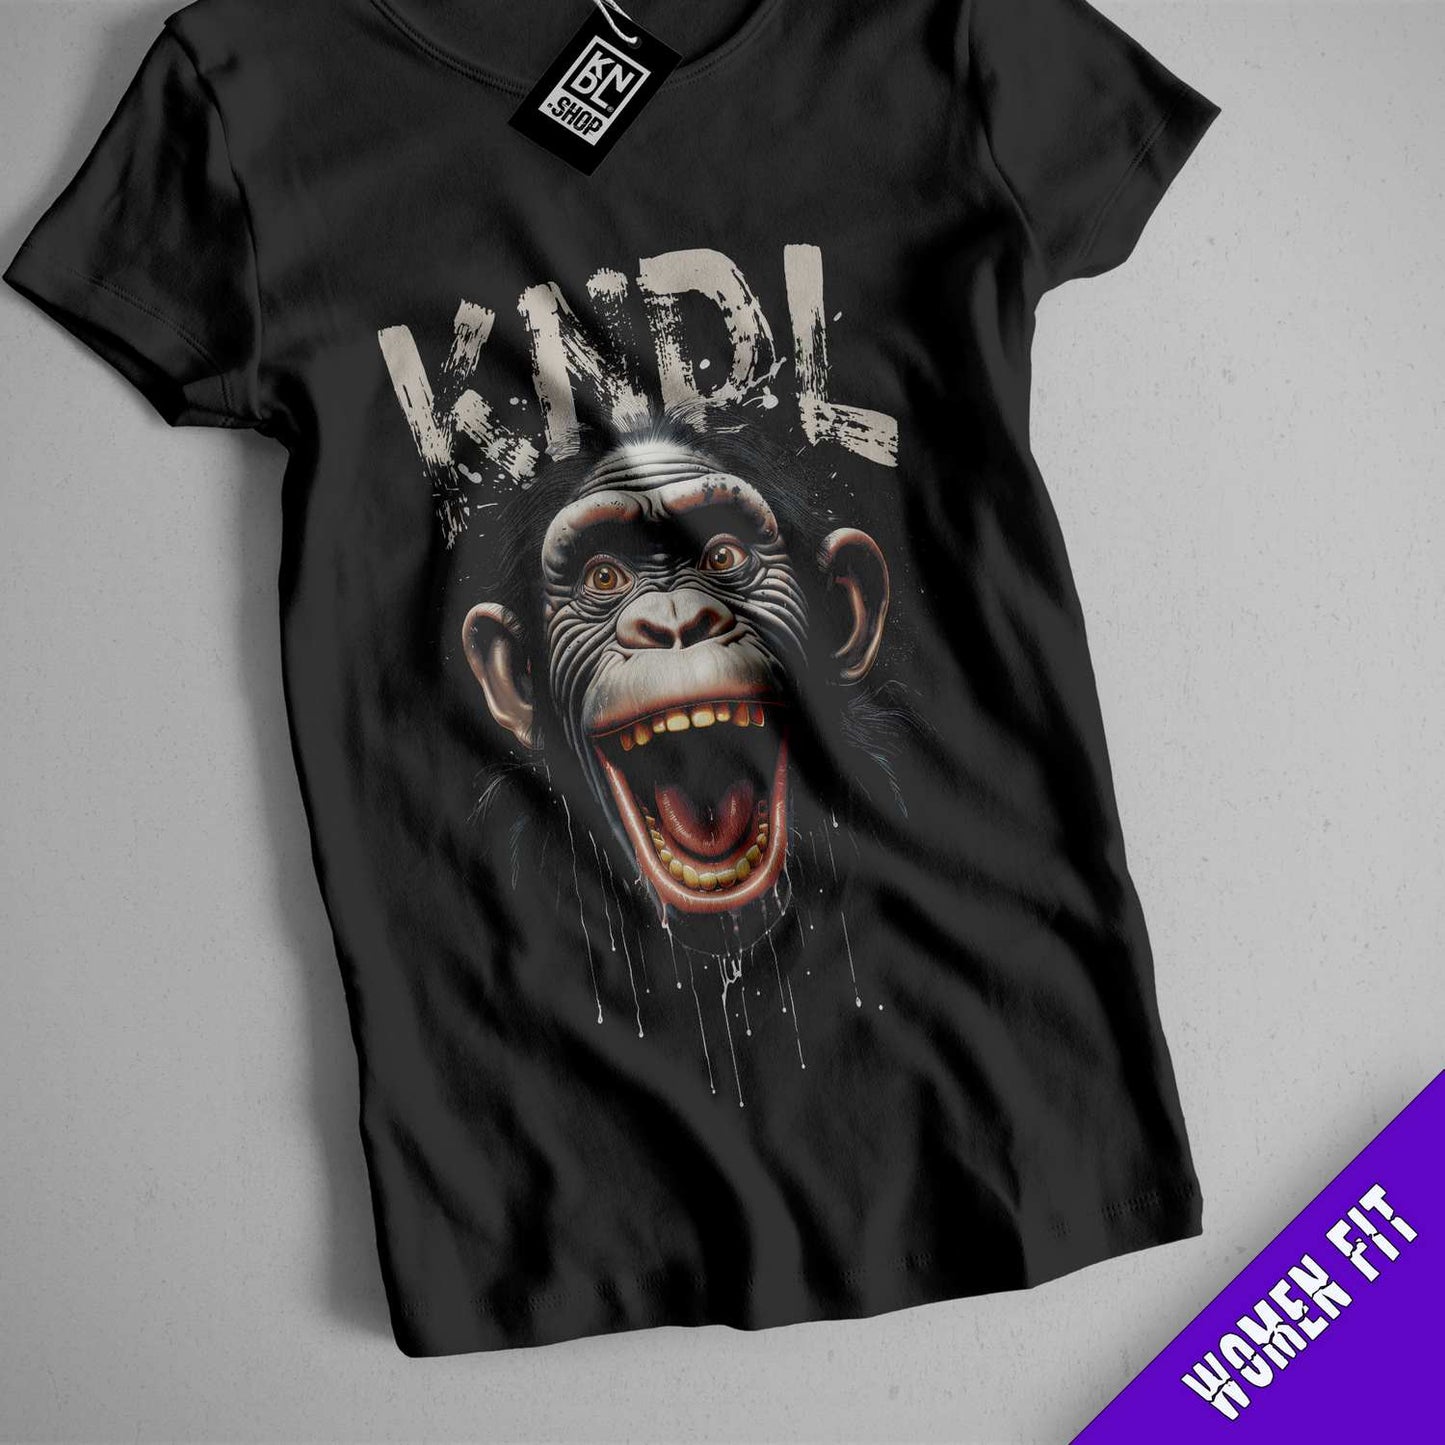 a black shirt with a gorilla face on it